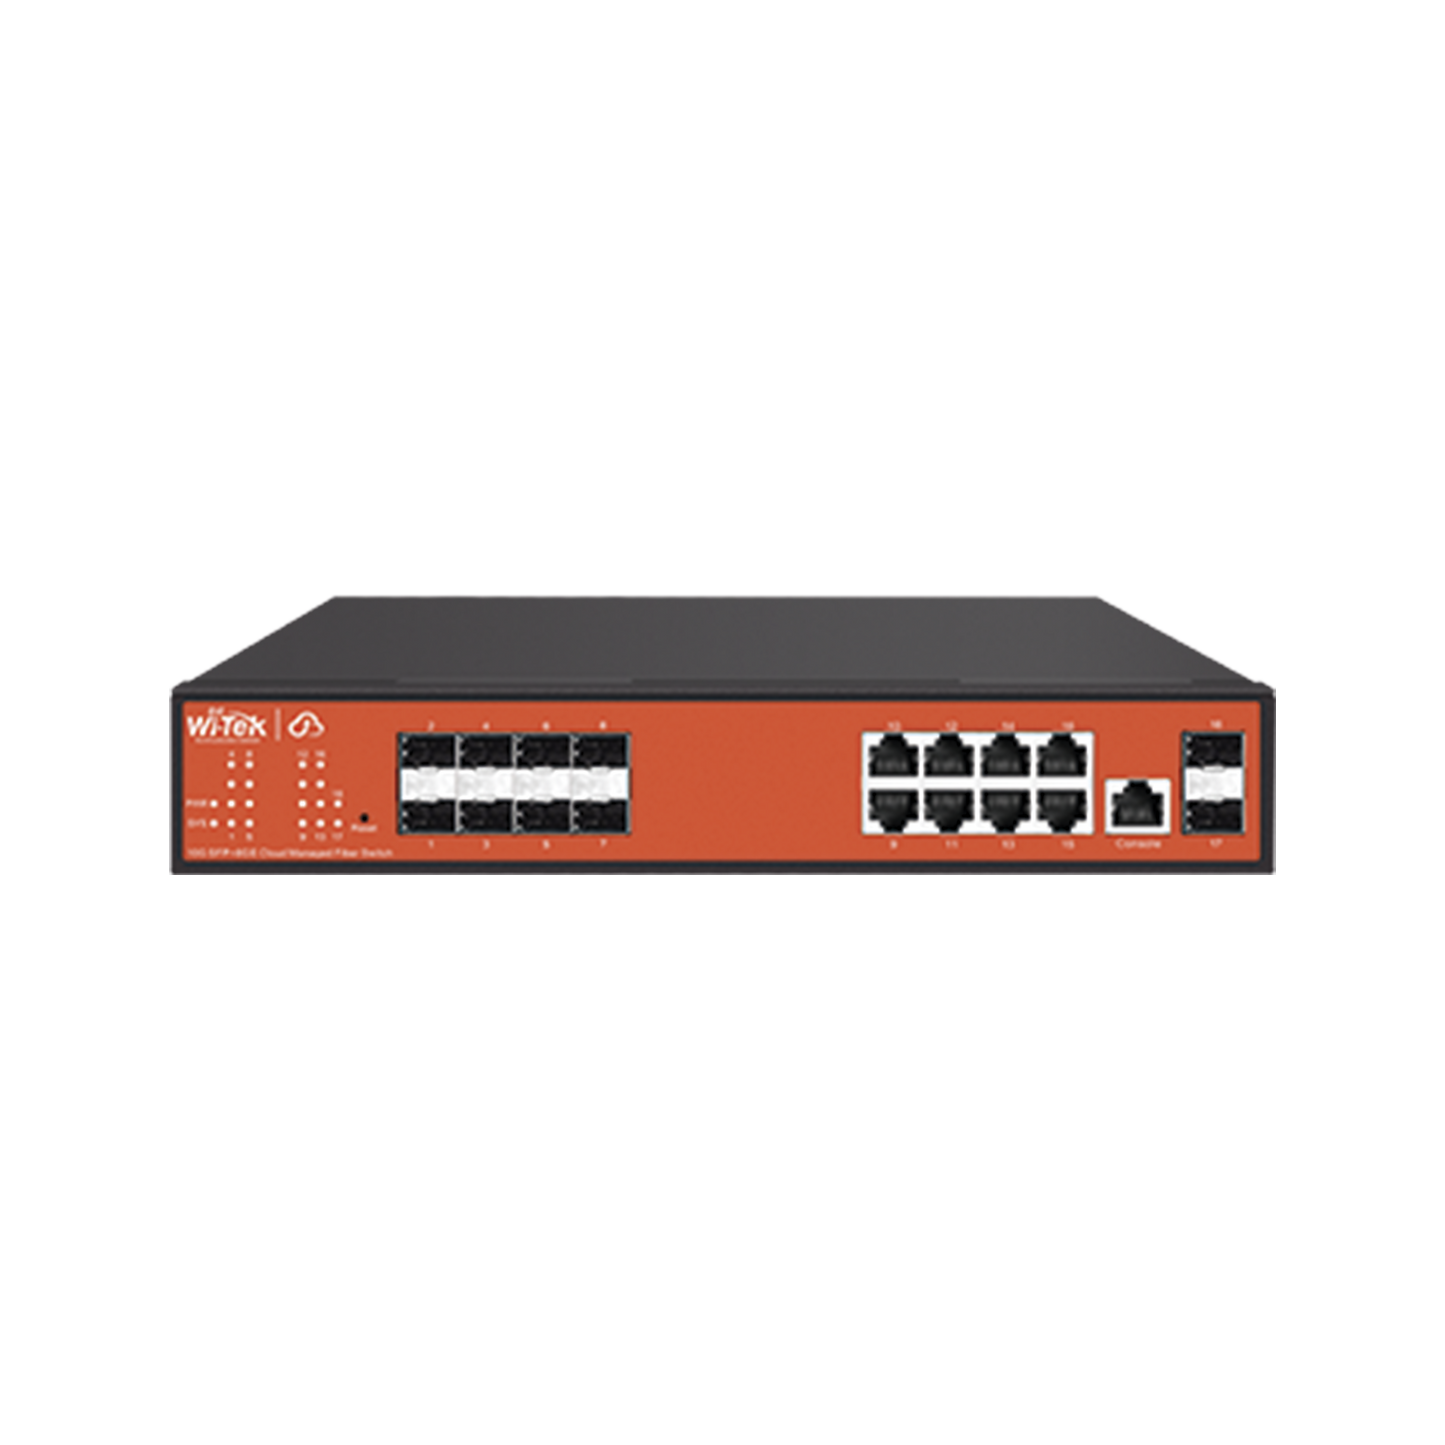 WI-CGS5018 Cloud Switch with 8 Gigabit Ports and 10 Gigabit SFP Slots (L2)